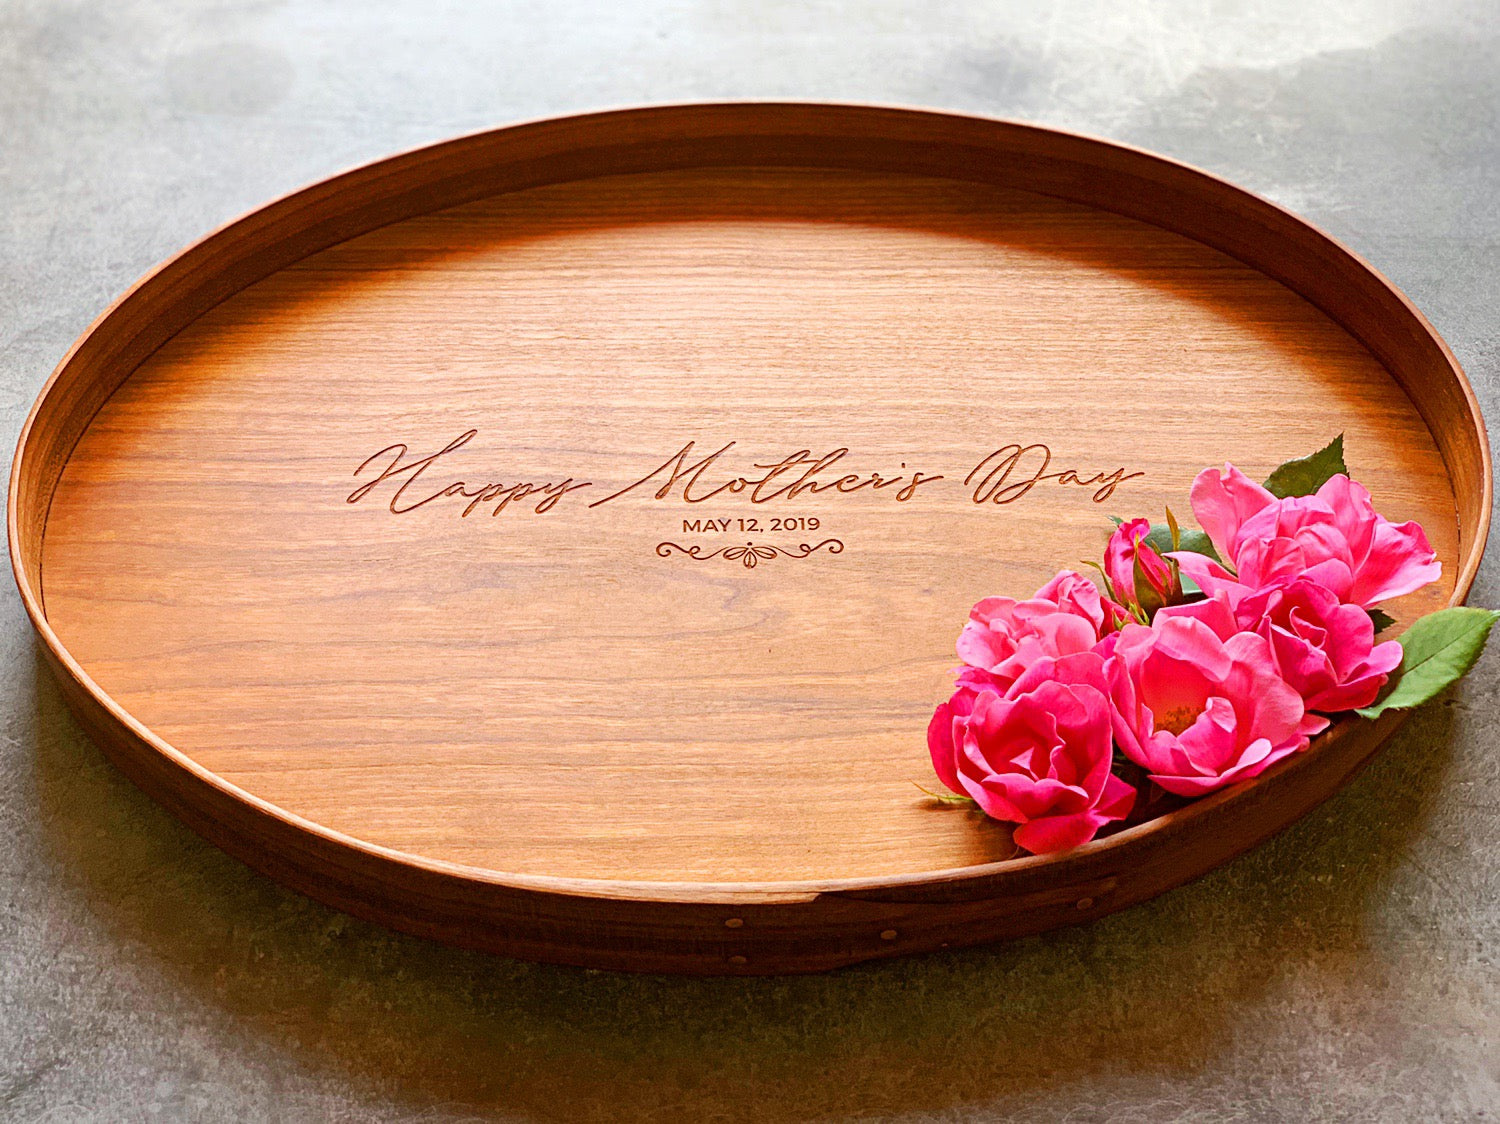 WOOD TRAY - Name and date